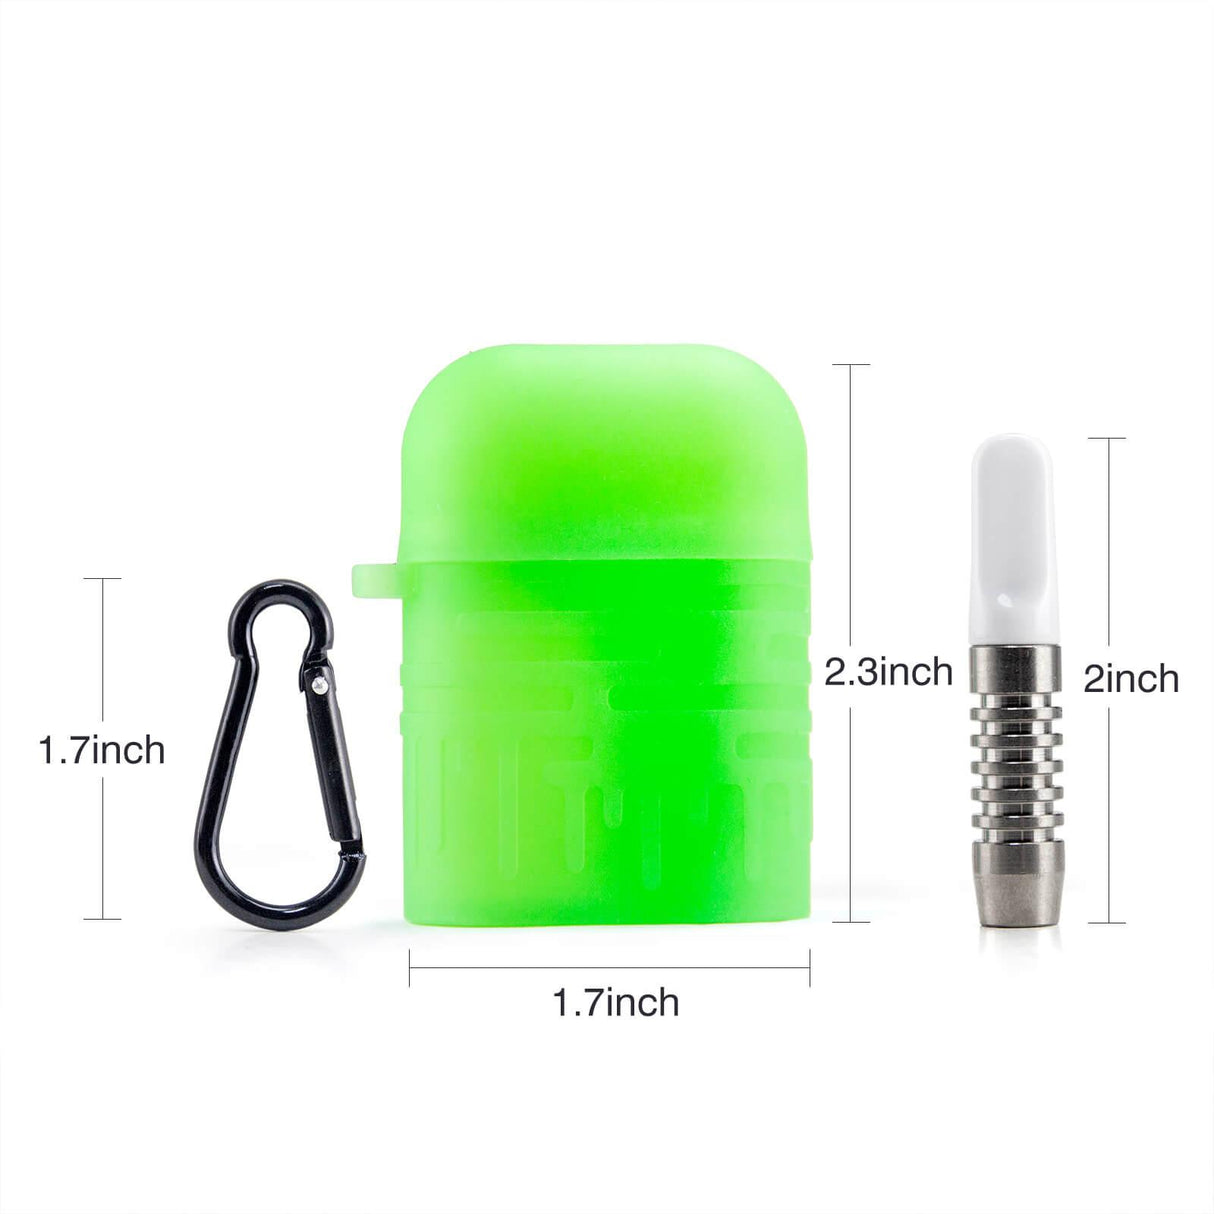 PILOT DIARY Silicone One Hitter Dugout in Green with Carabiner - Front View with Dimensions